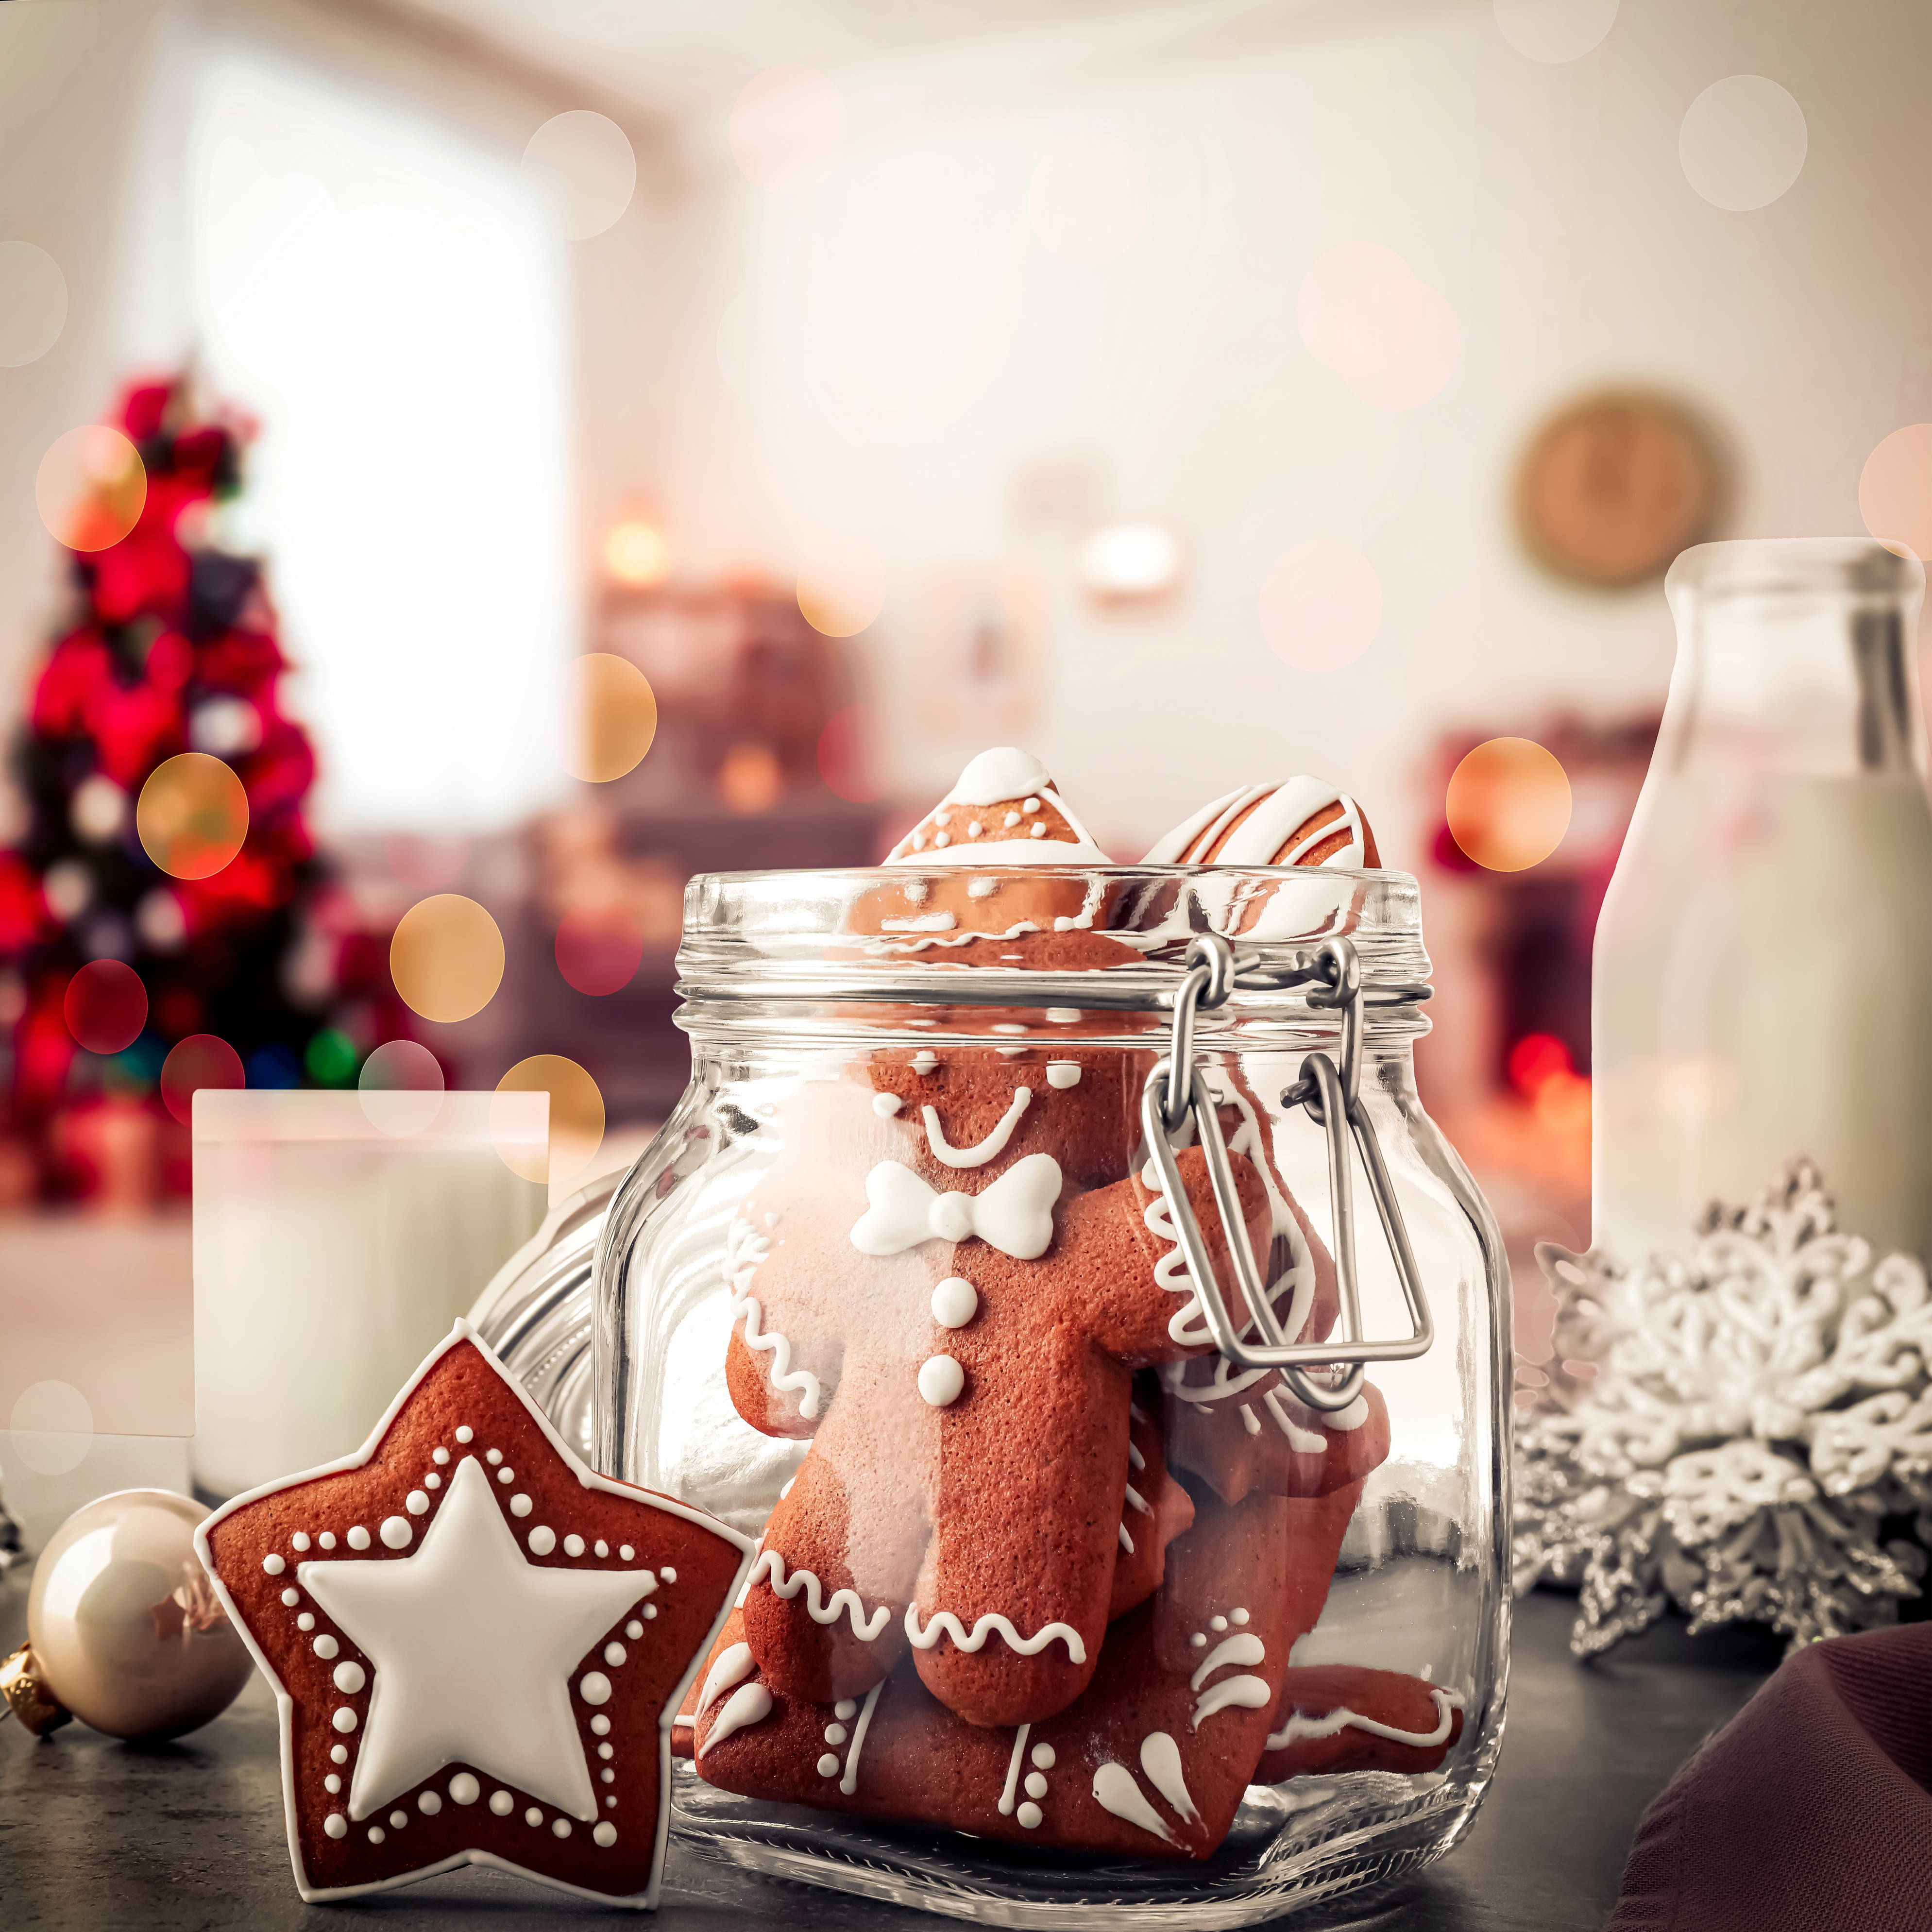 A glass jar filled with iced gingerbread cookies for the holidays.